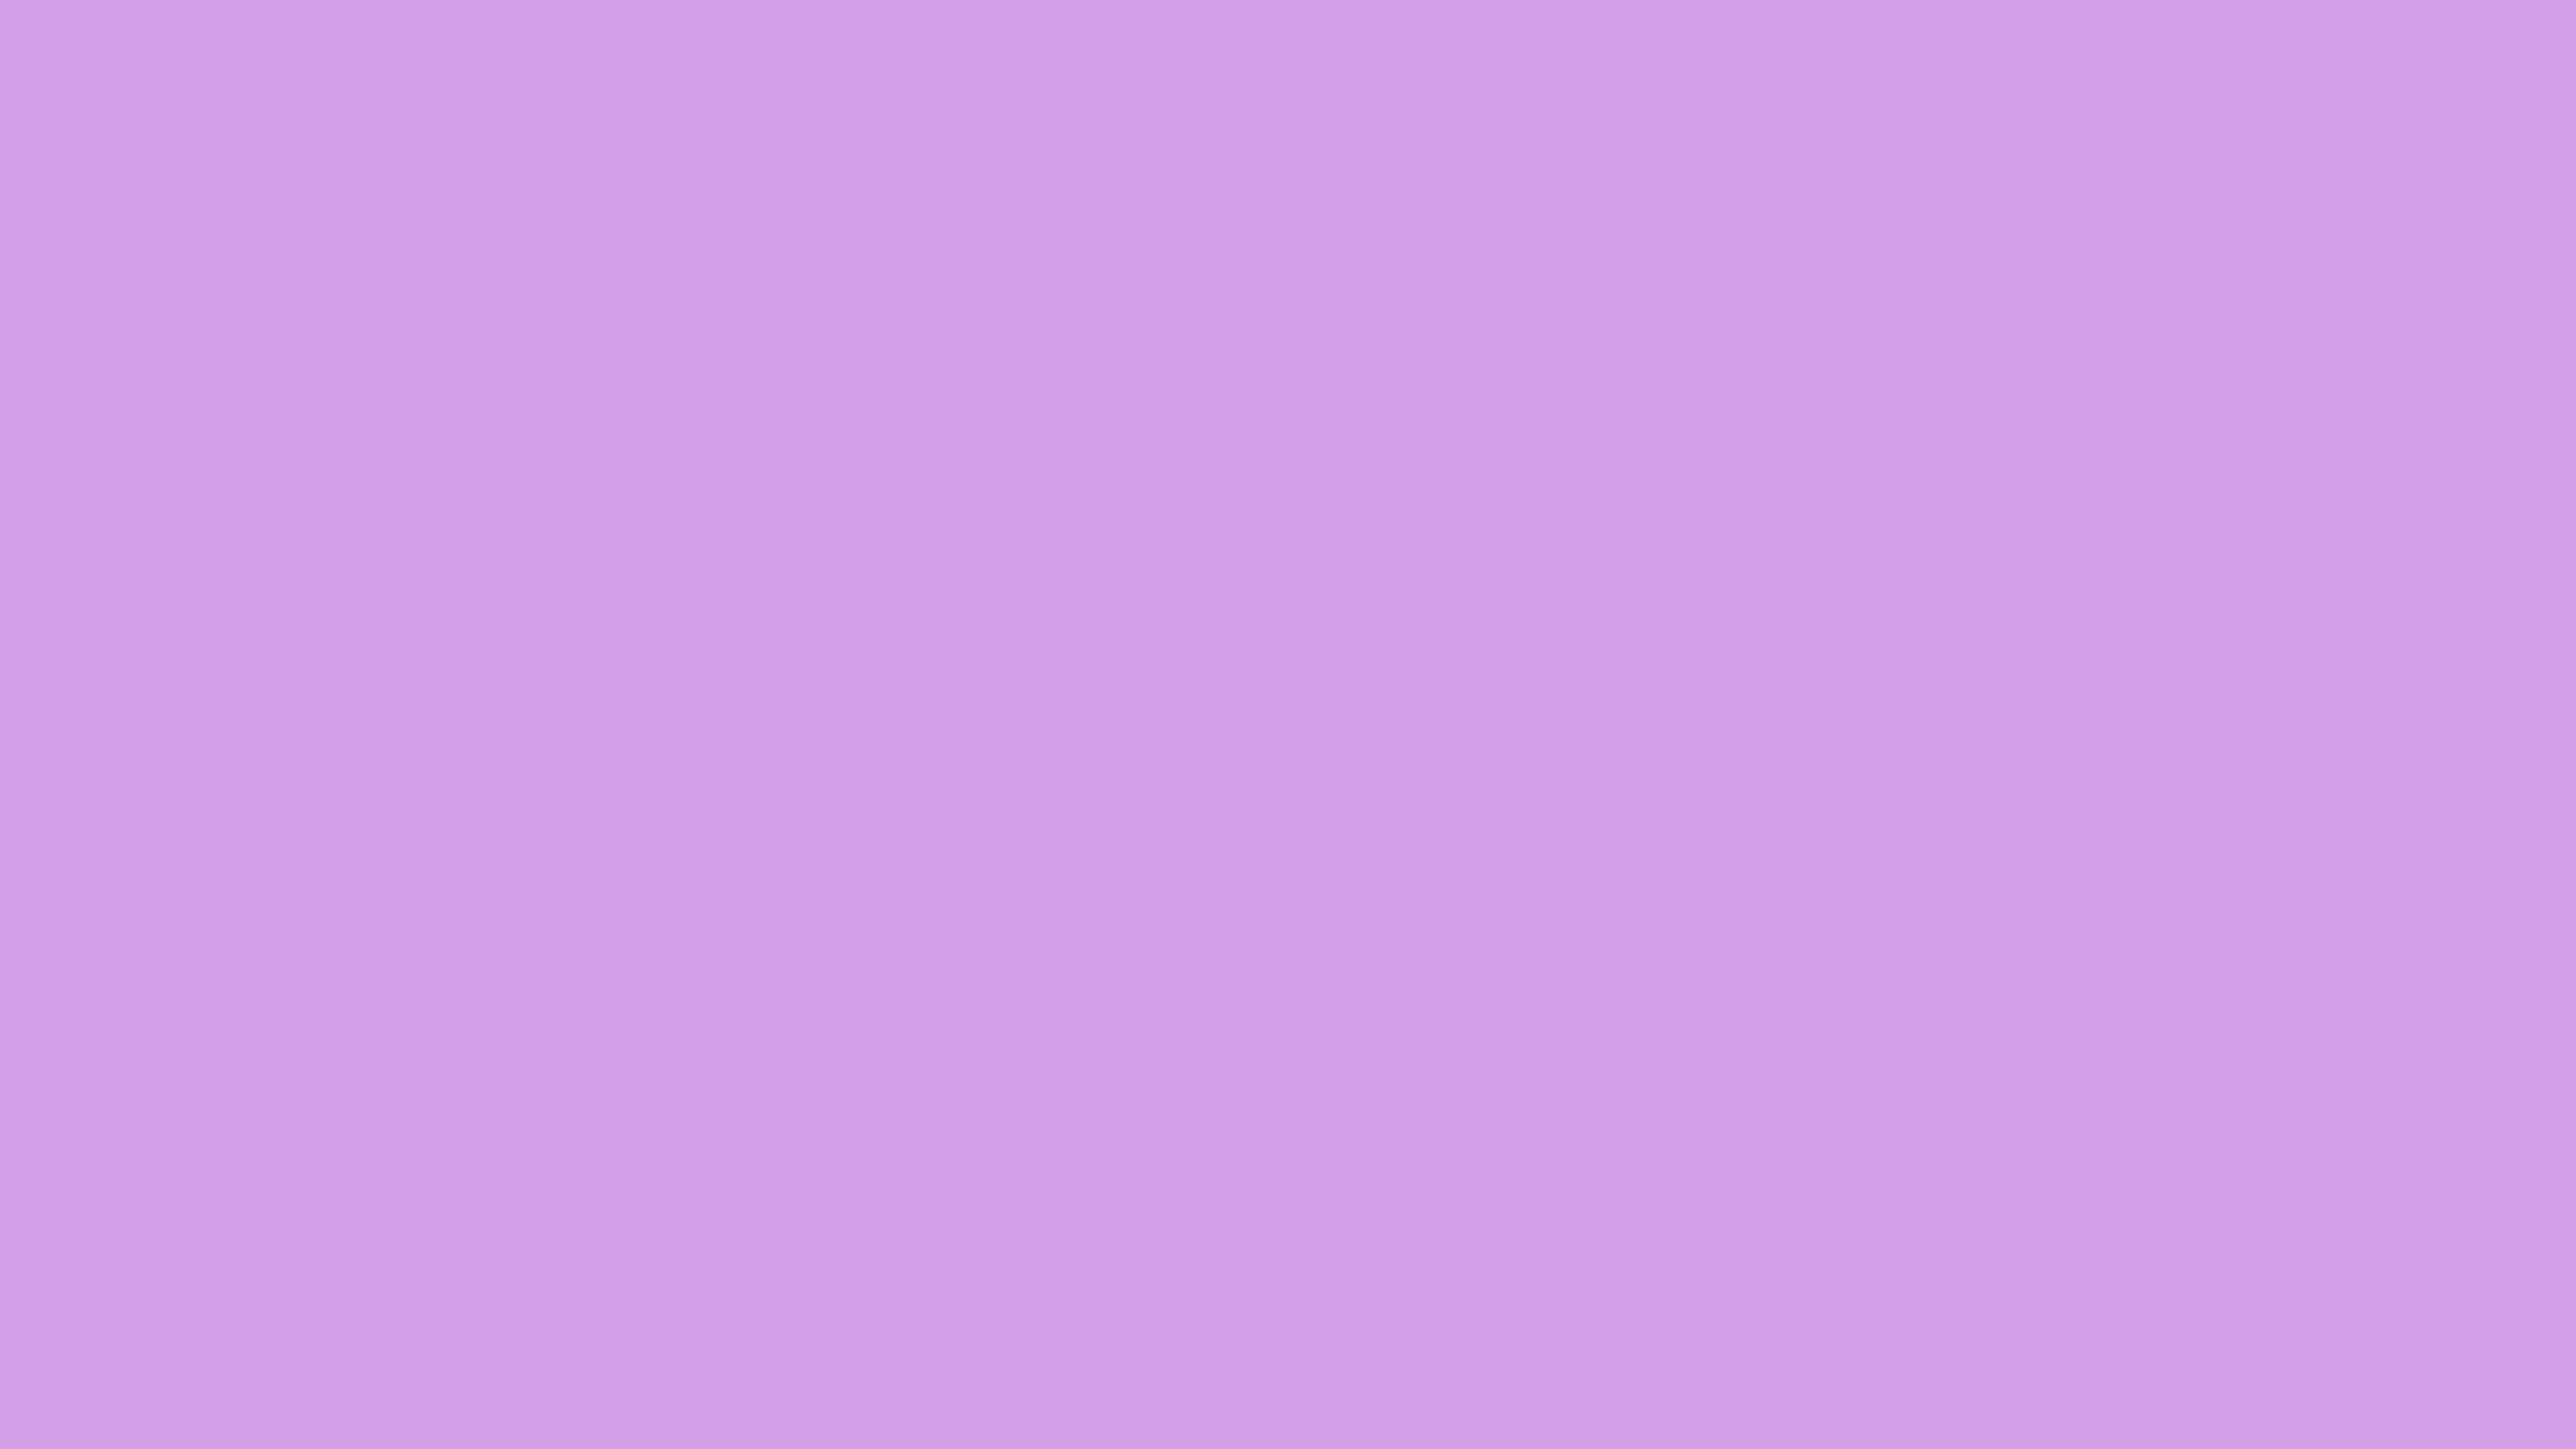 7680x4320 Bright Ube Solid Color Background